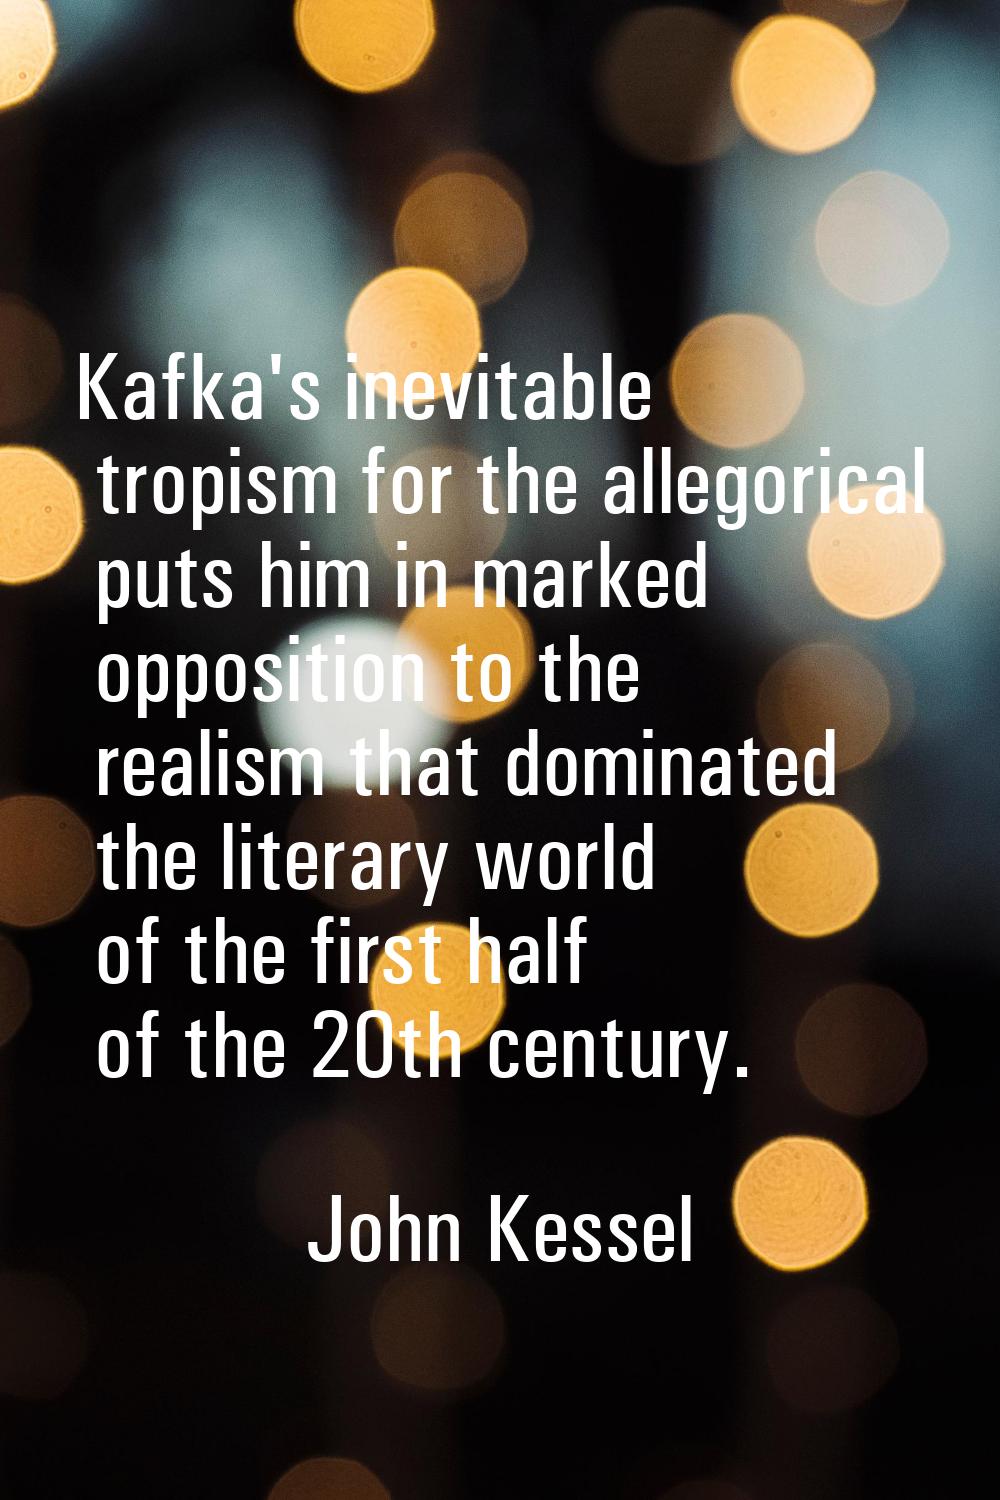 Kafka's inevitable tropism for the allegorical puts him in marked opposition to the realism that do